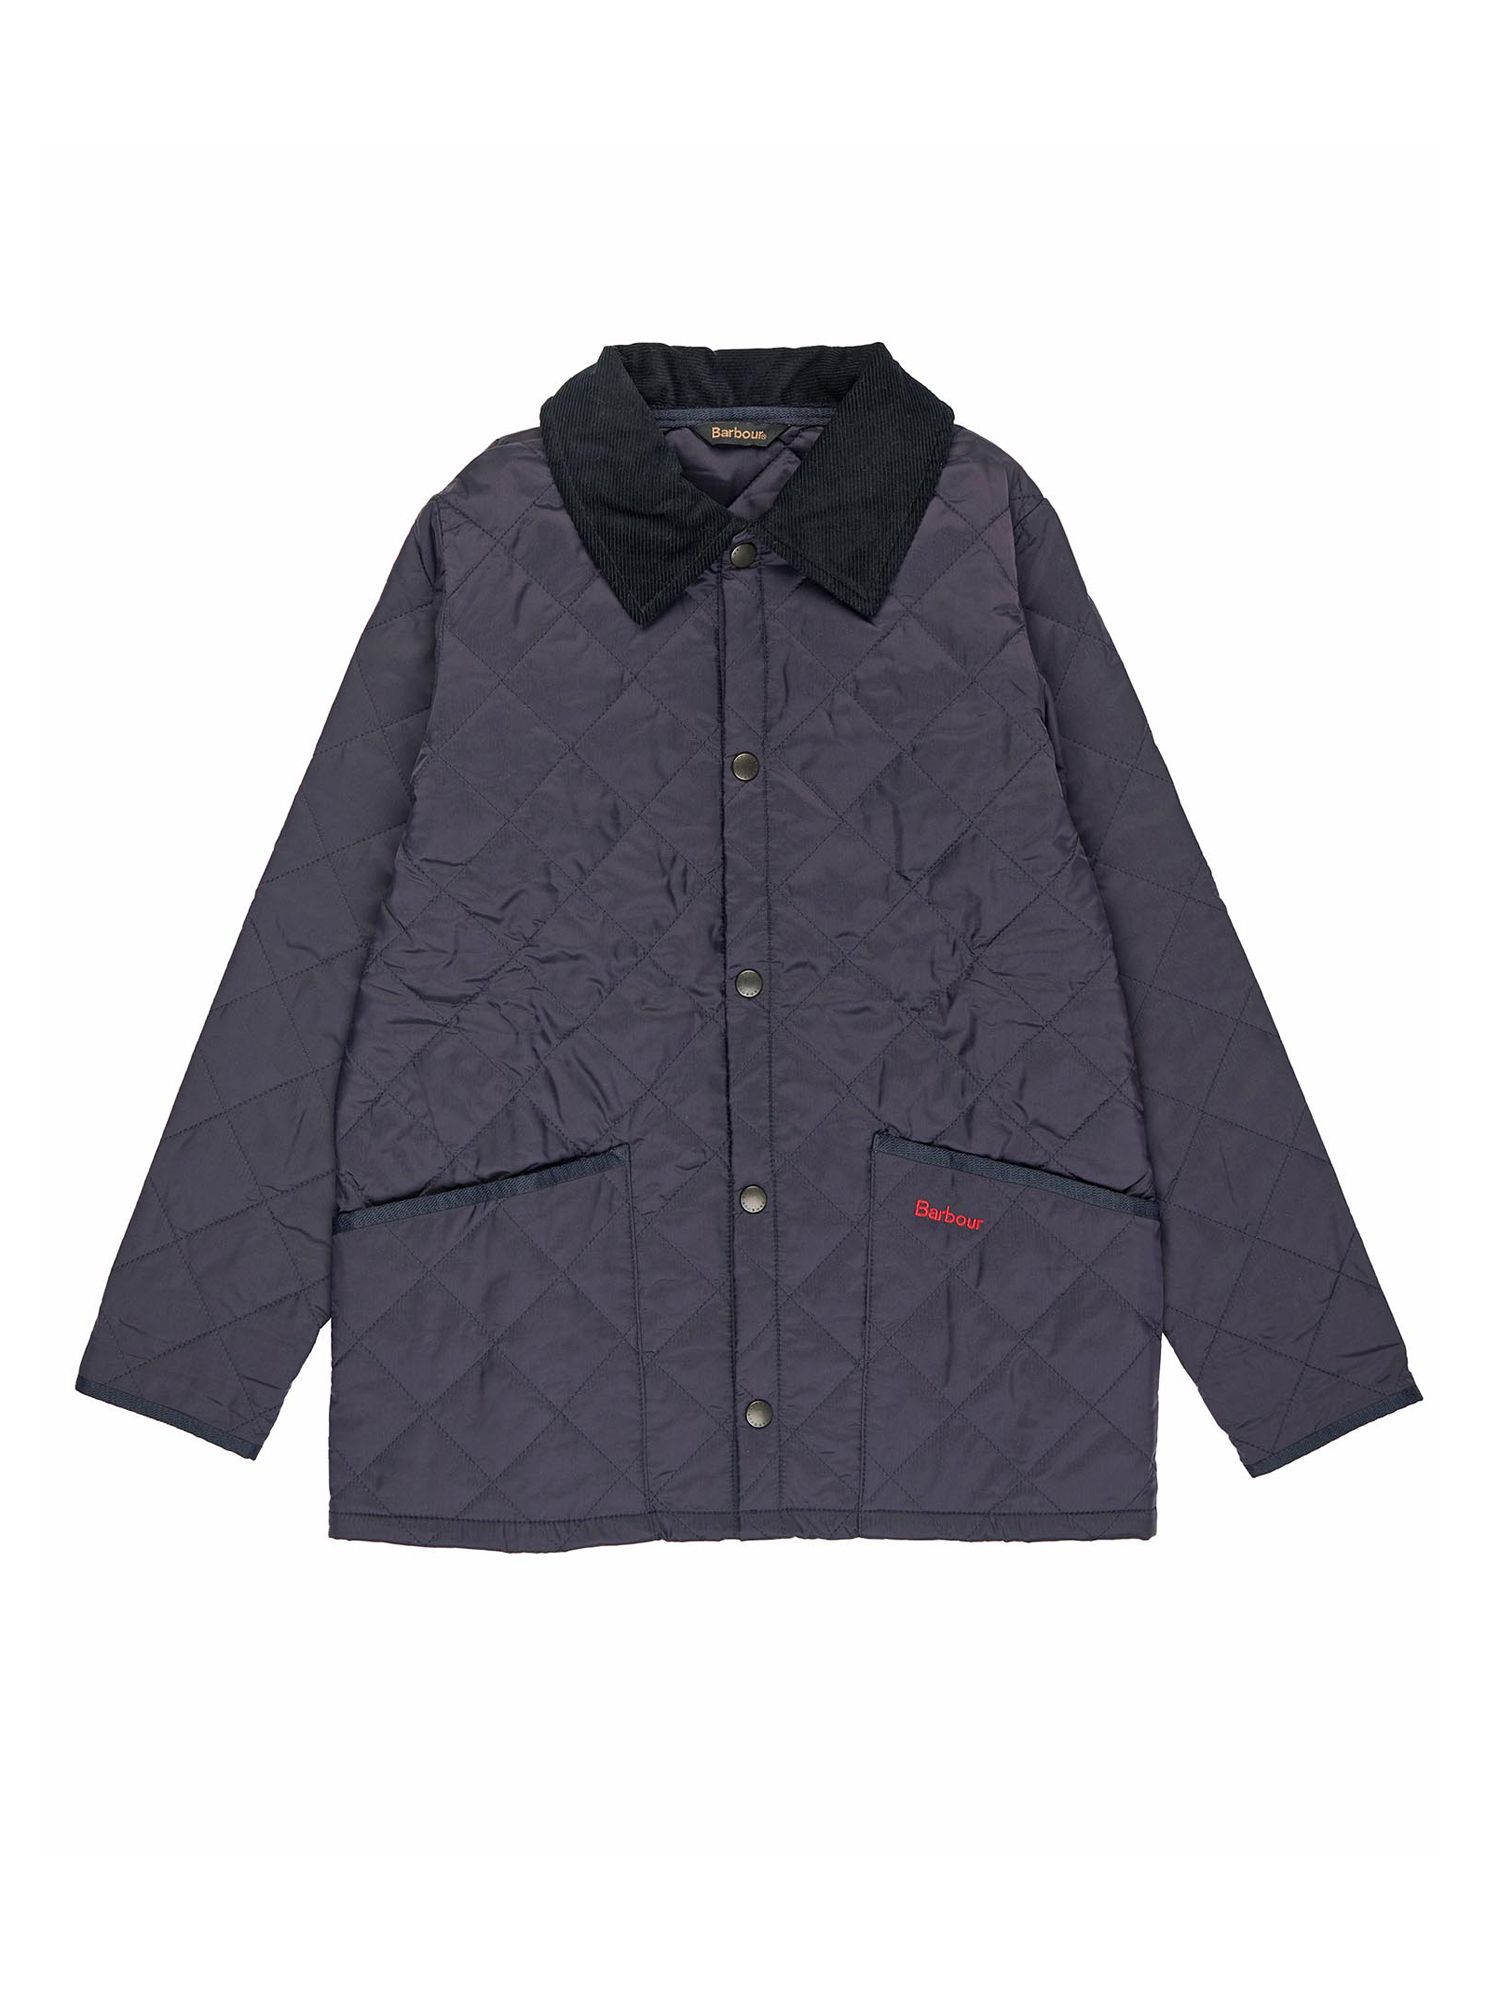 Barbour Kids' Liddesdale Quilted Jacket, Navy